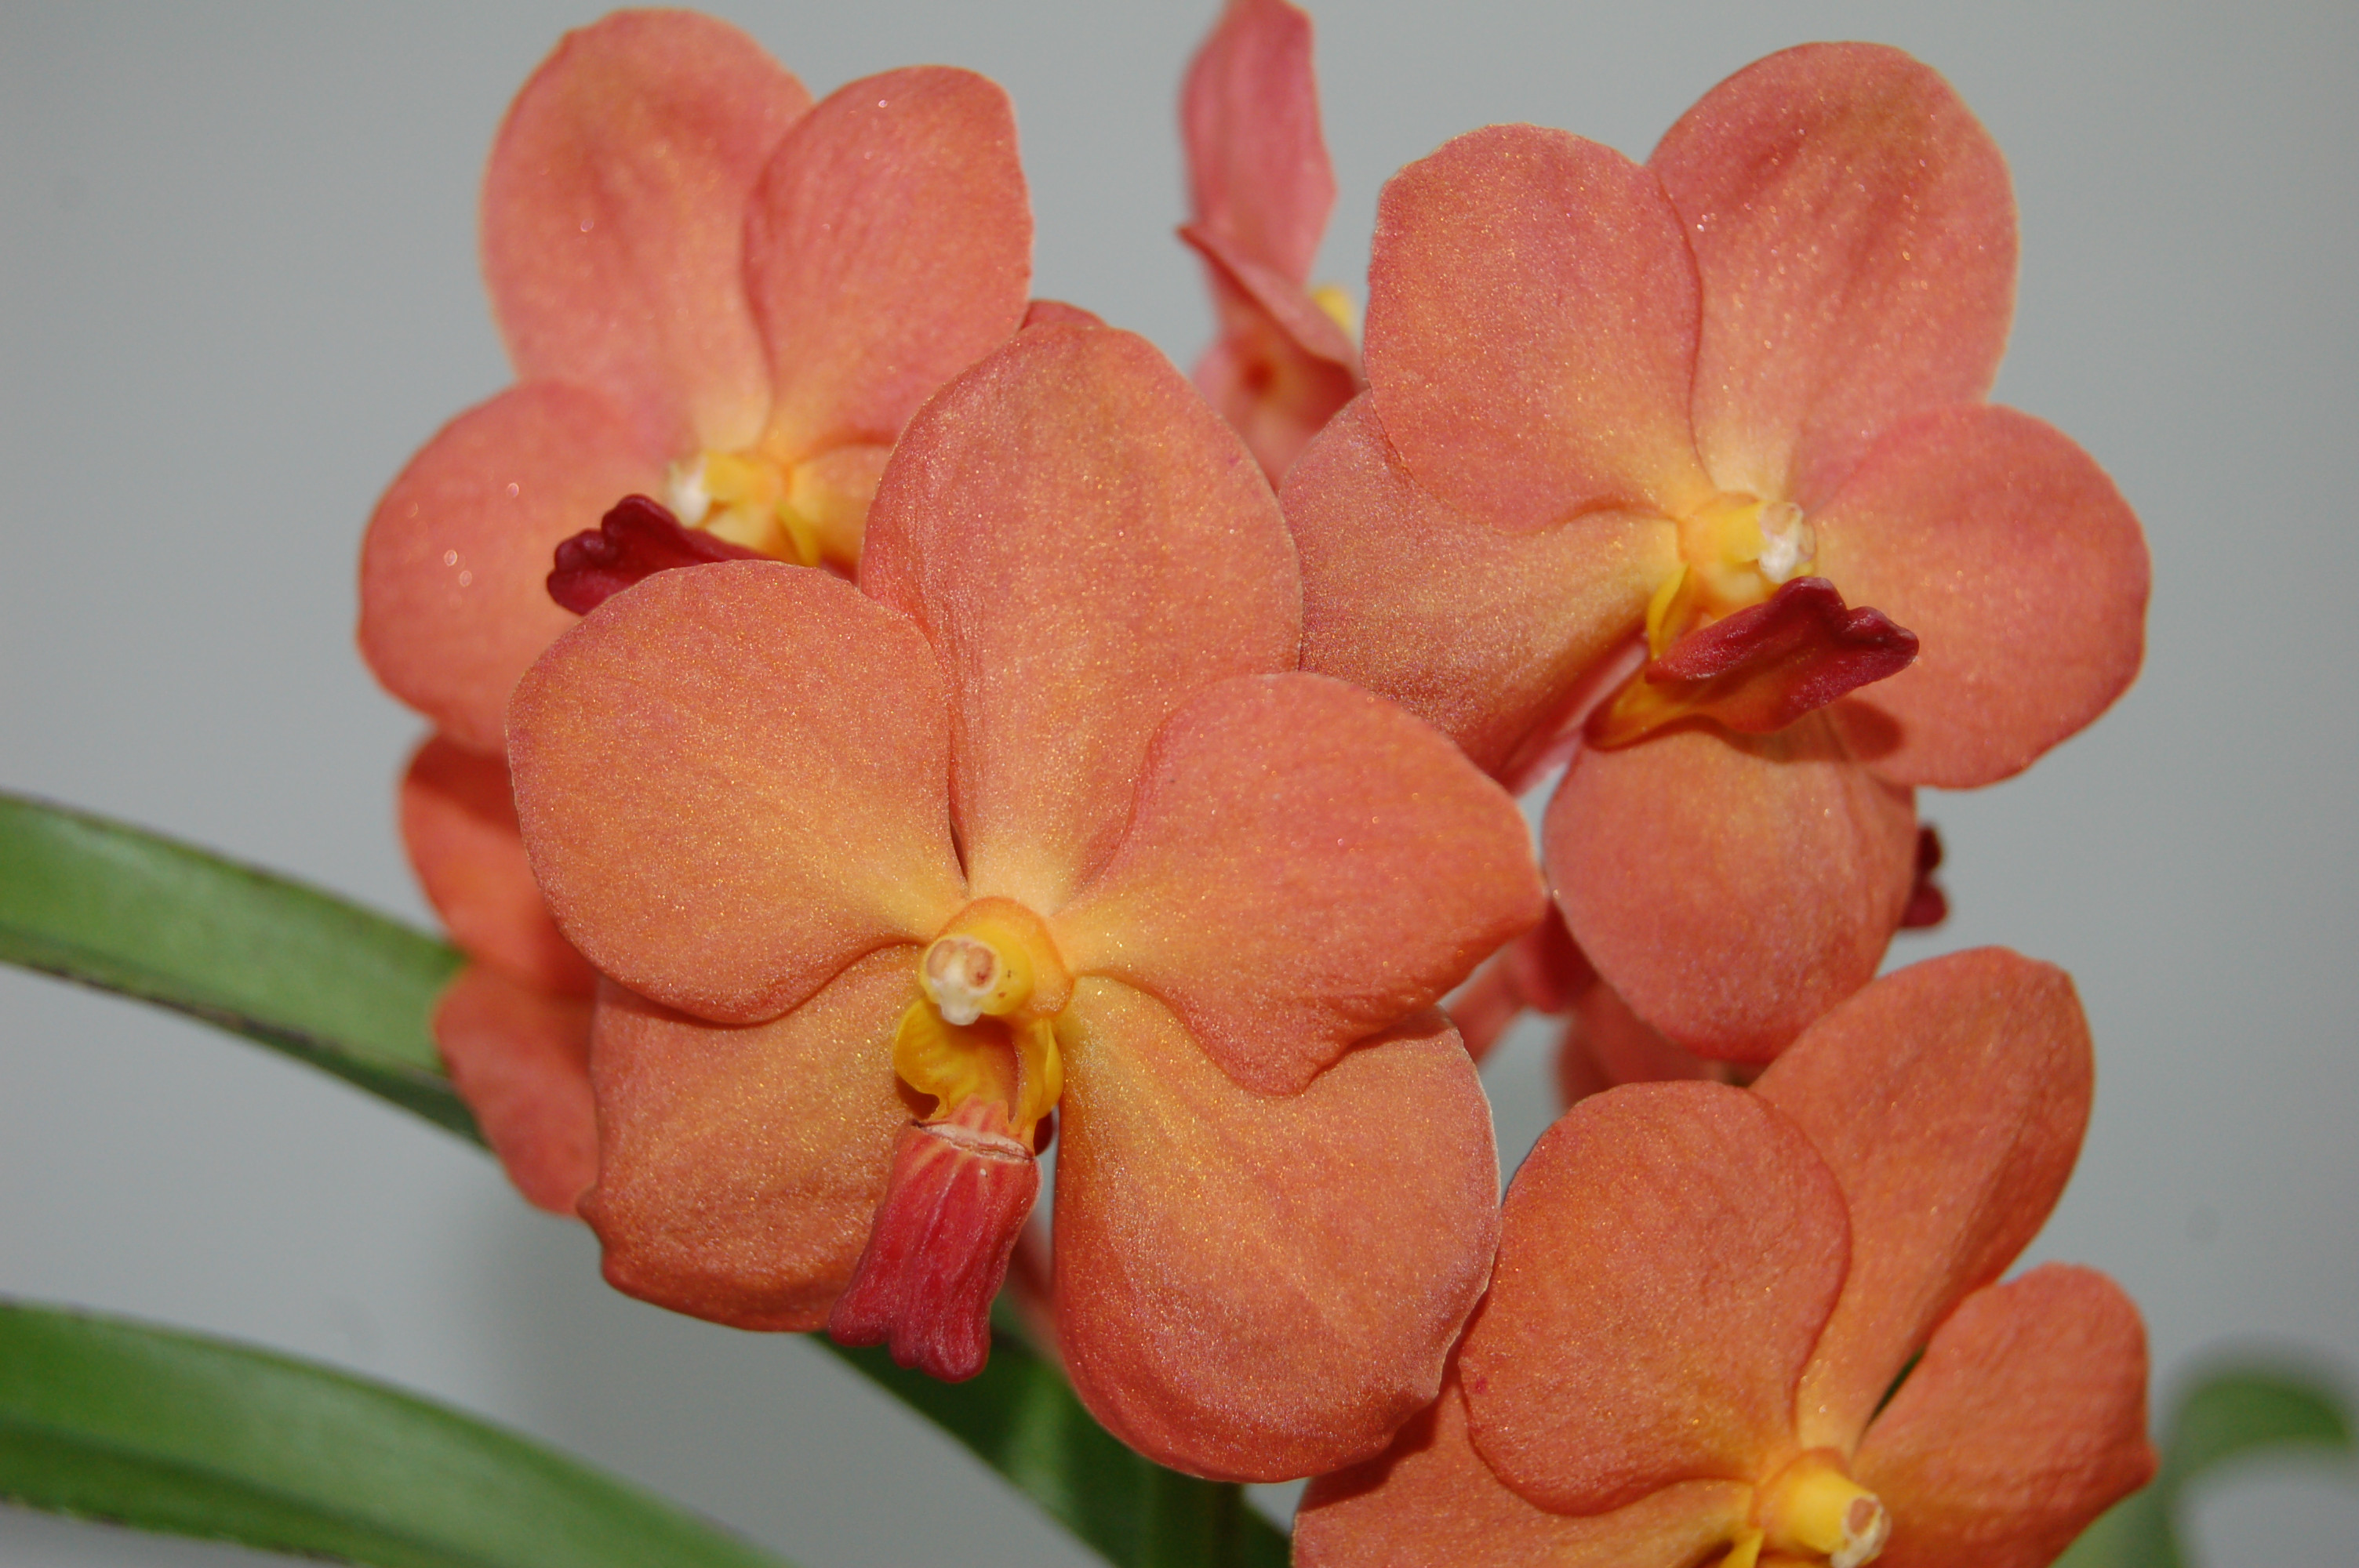 Ascocenda Thai Peach | Orchideen-Wichmann.de - Highest horticultural  quality and experience since 1897